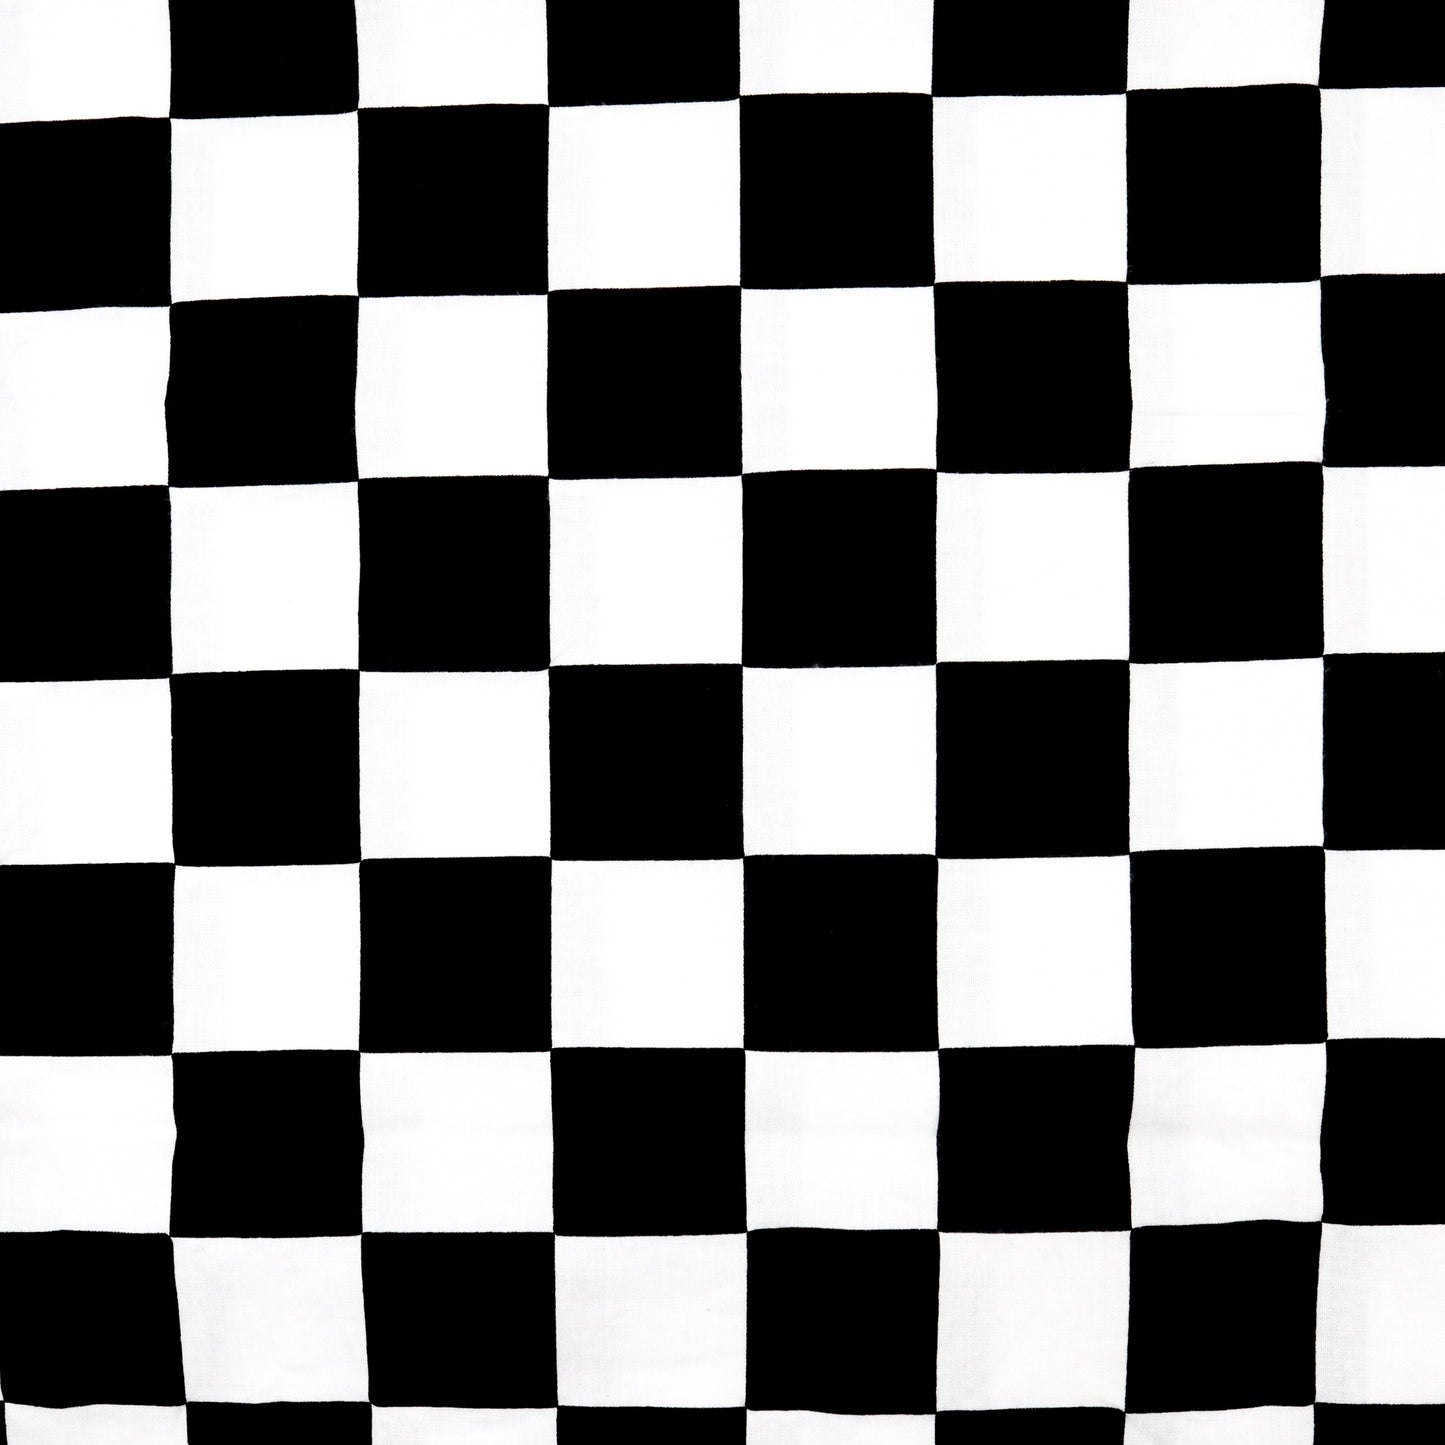 B&W Racing Checkers - Quilting Cotton